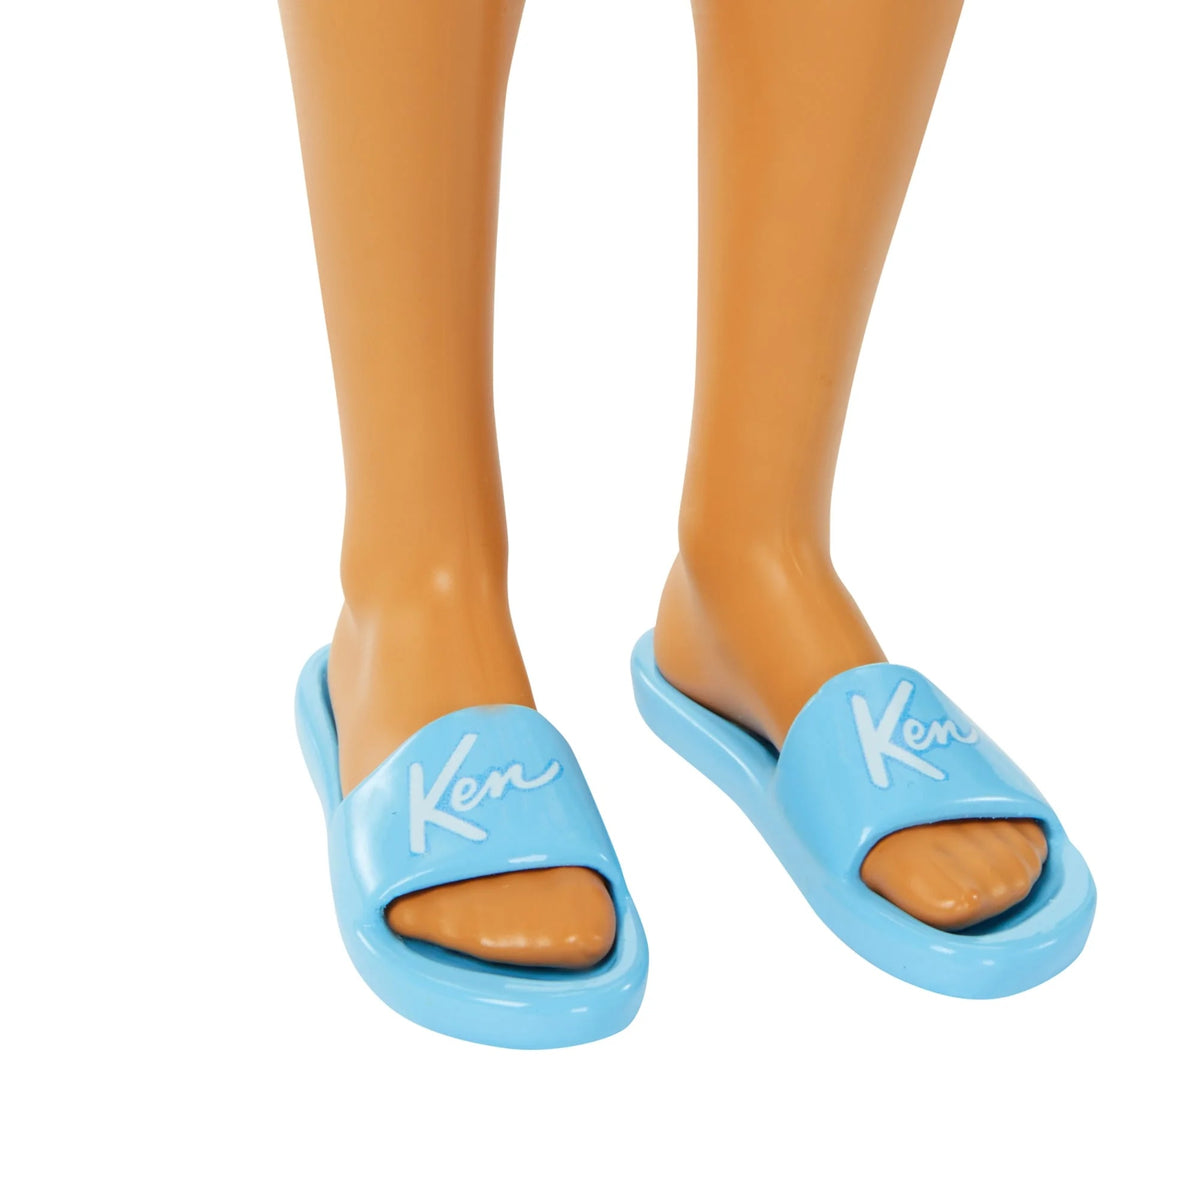 Ken Doll with Swim Trunks and Beach-Themed Accessories